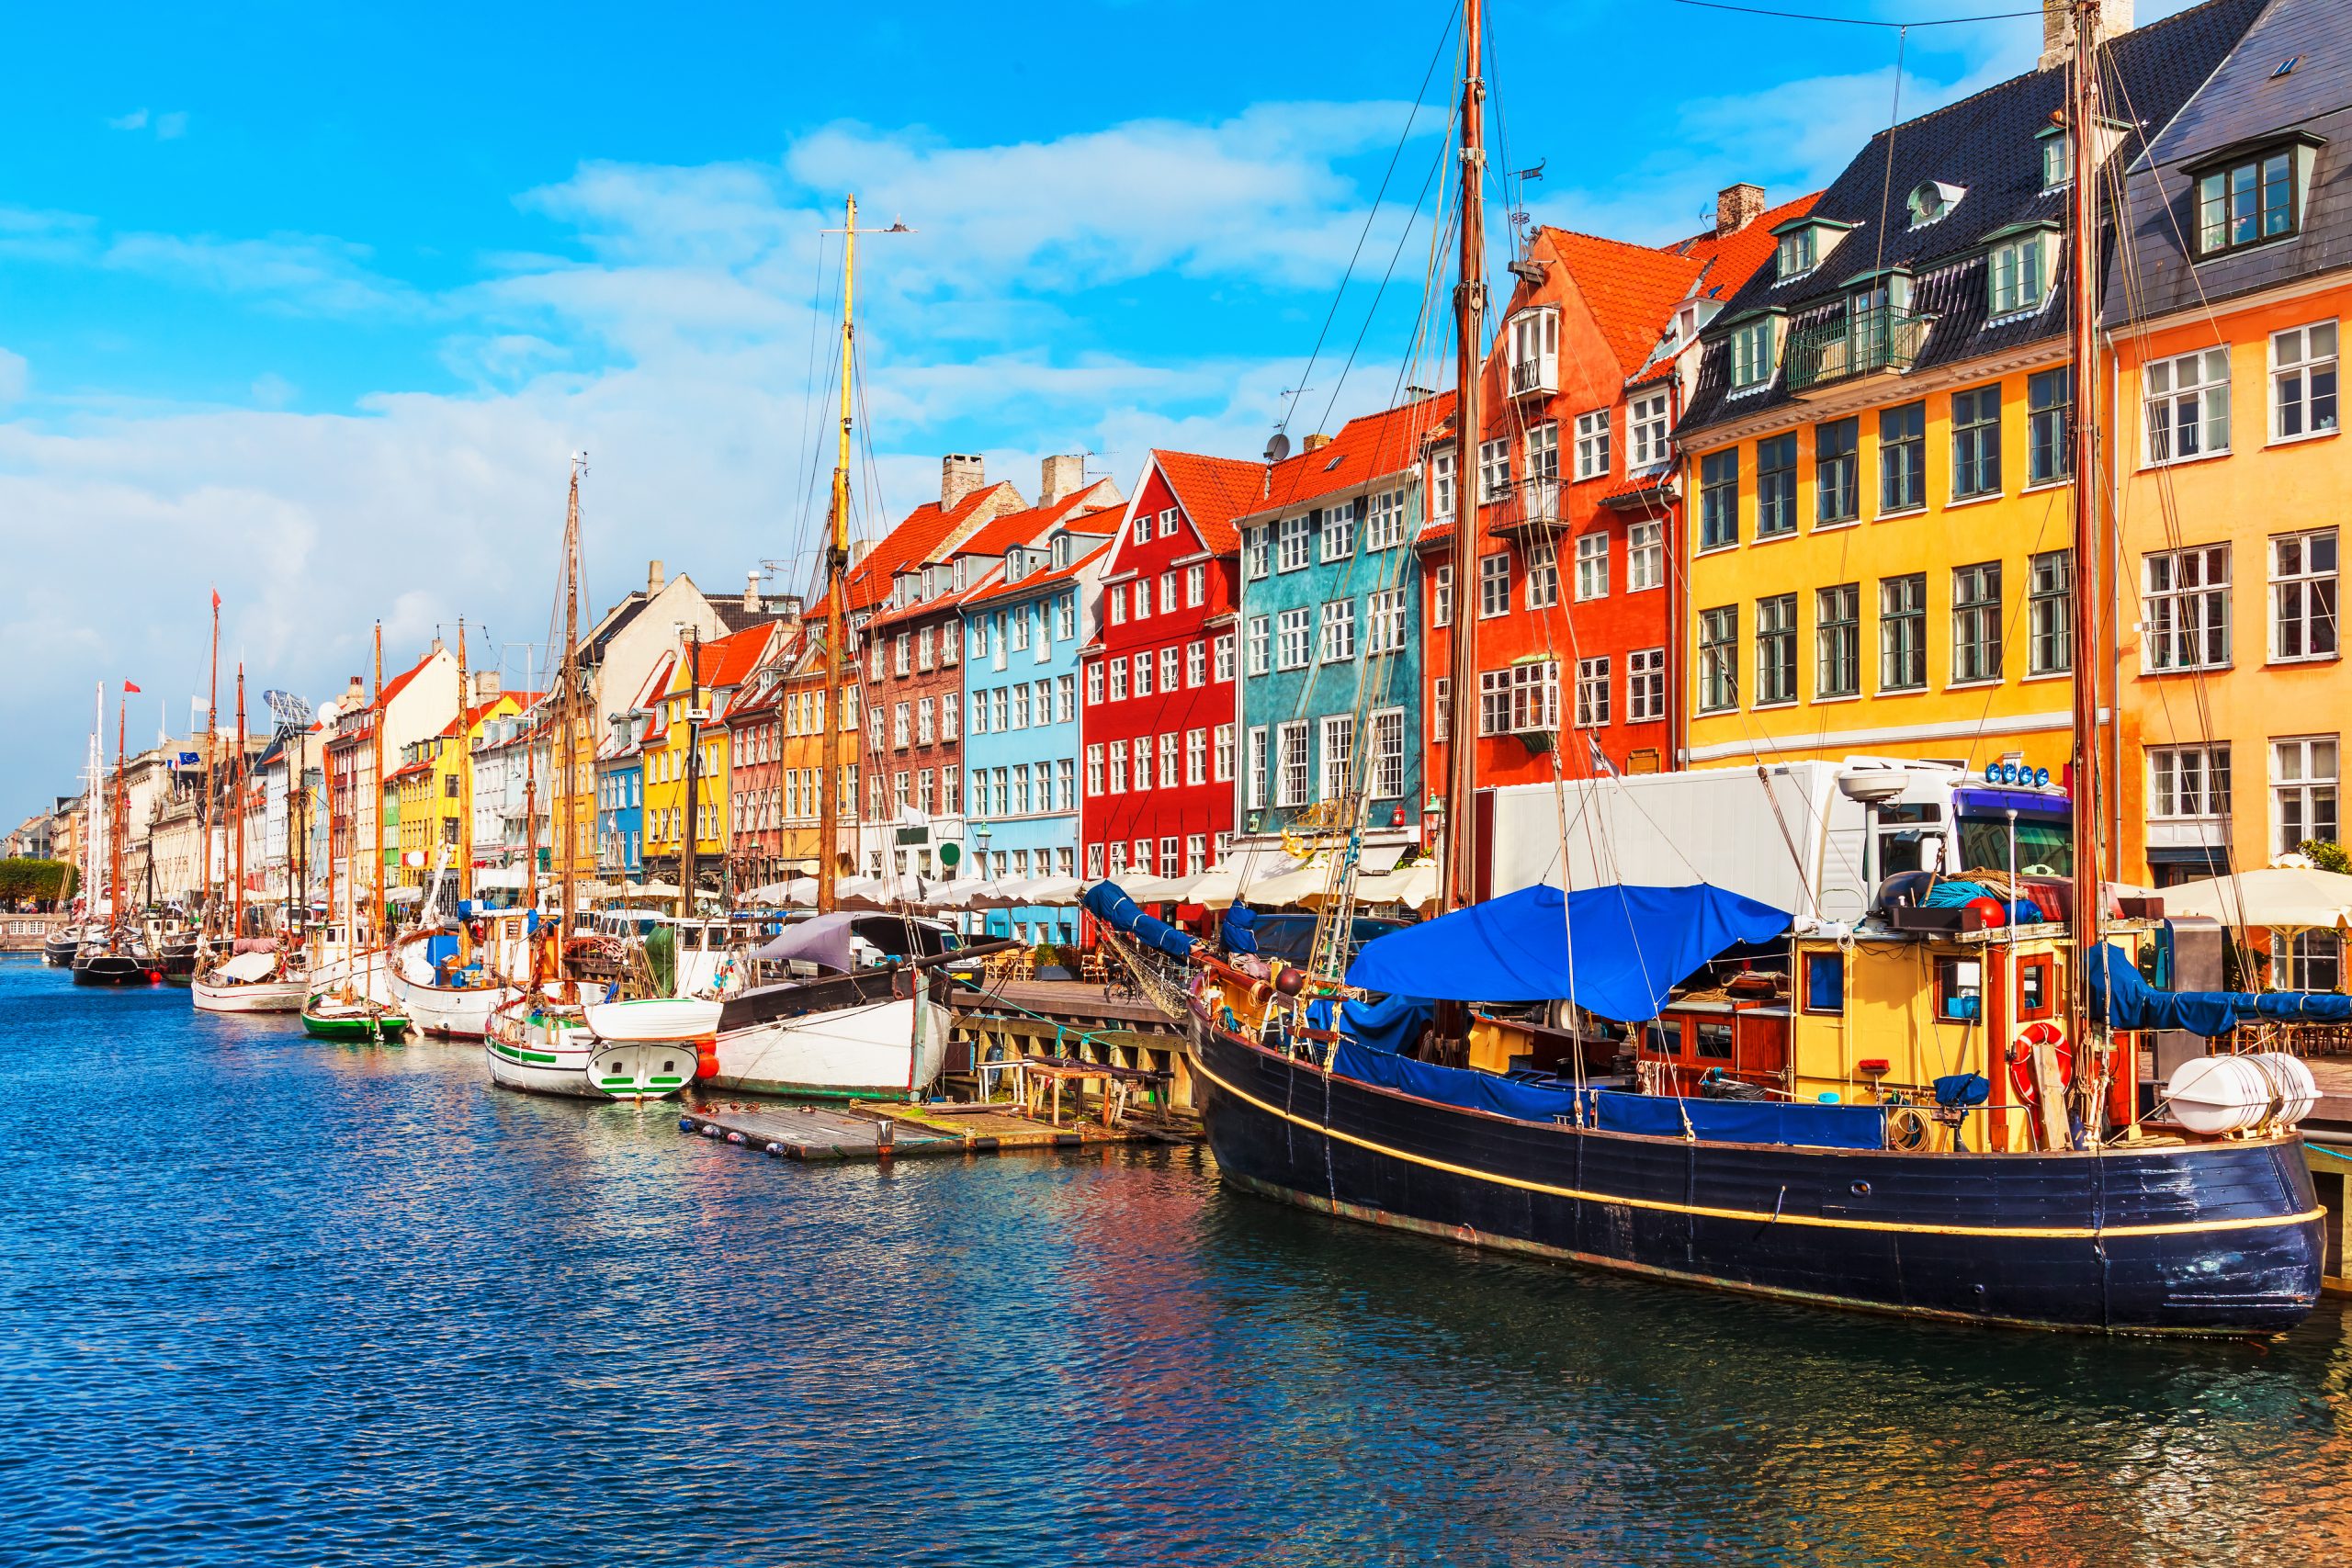 Discover Nyhavn - What to see in Copenhagen in 1 day?